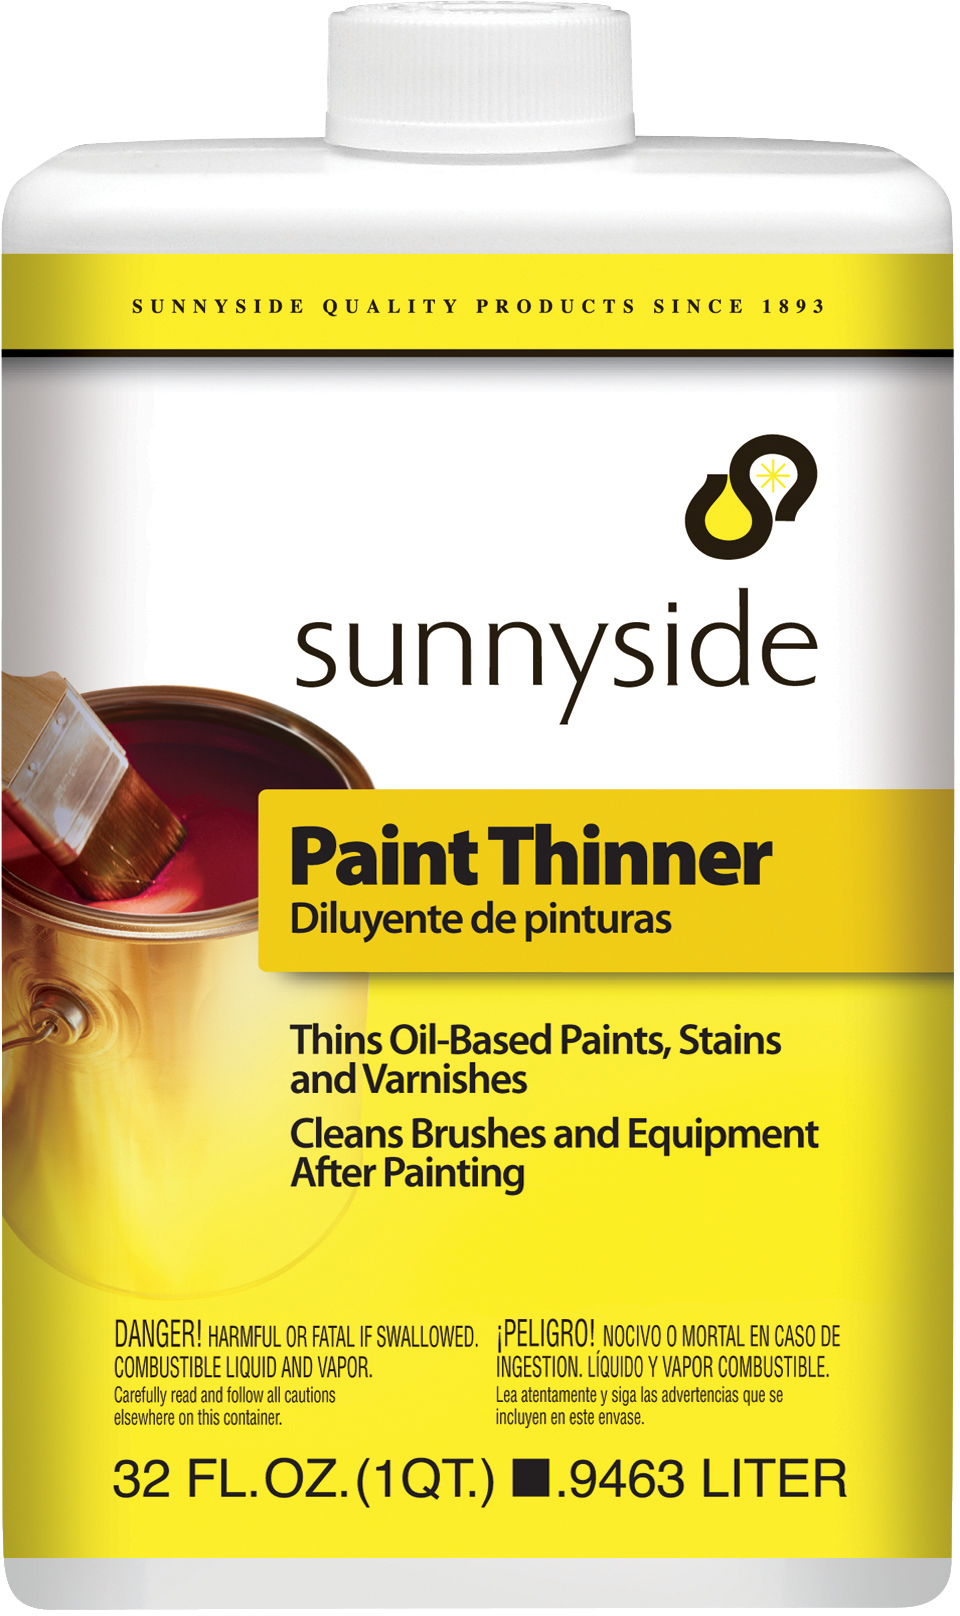 PAINT THINNER Product Image